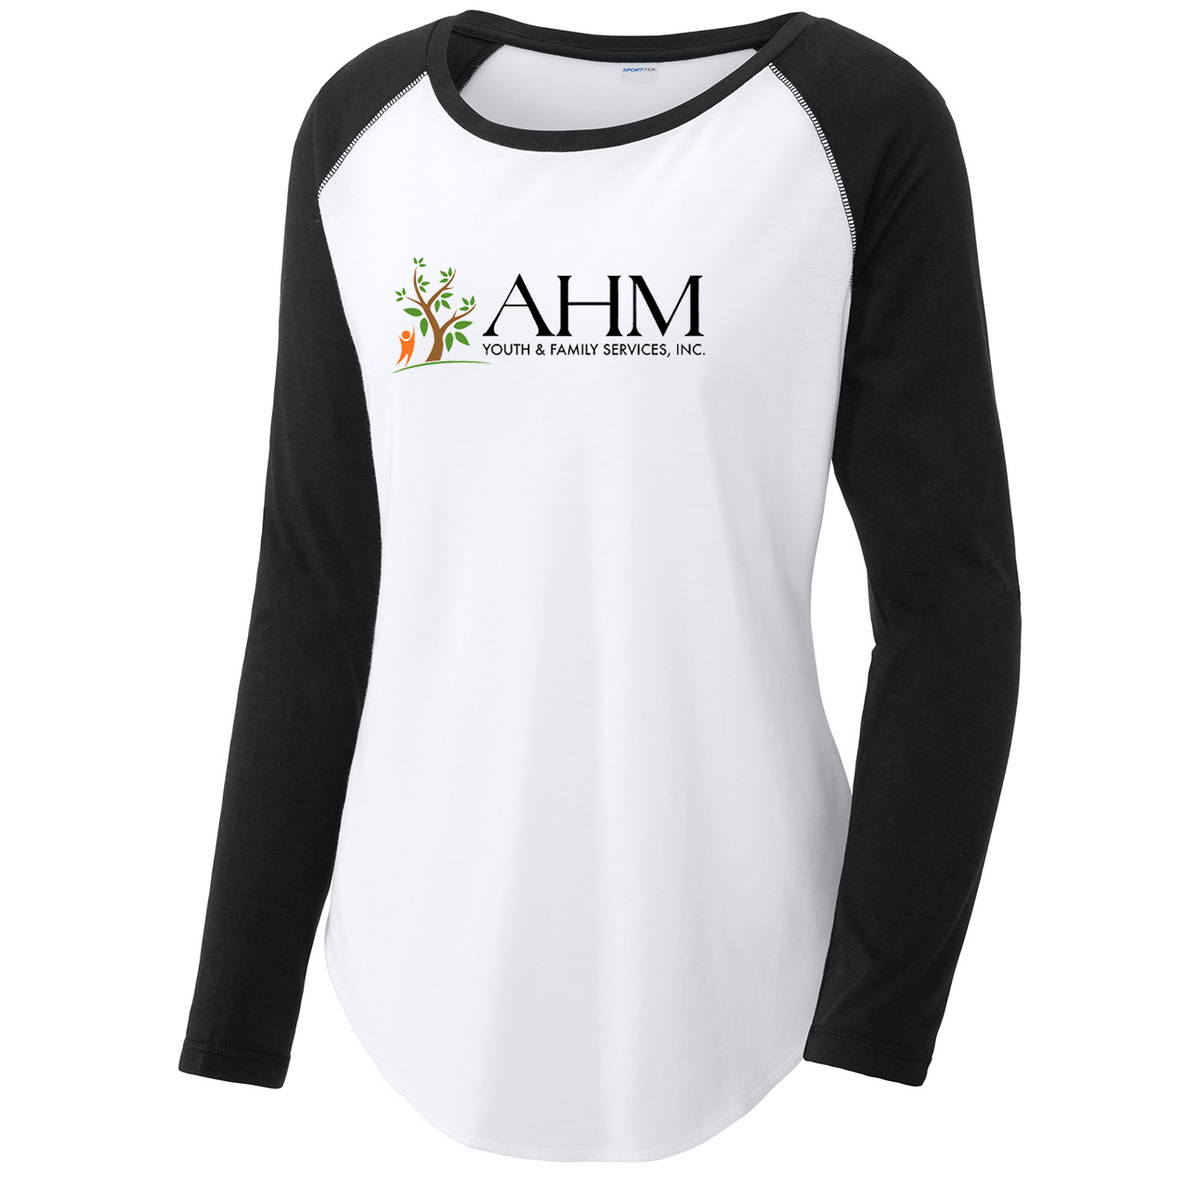 AHM Youth & Family Services Women's Raglan Long Sleeve CottonTouch